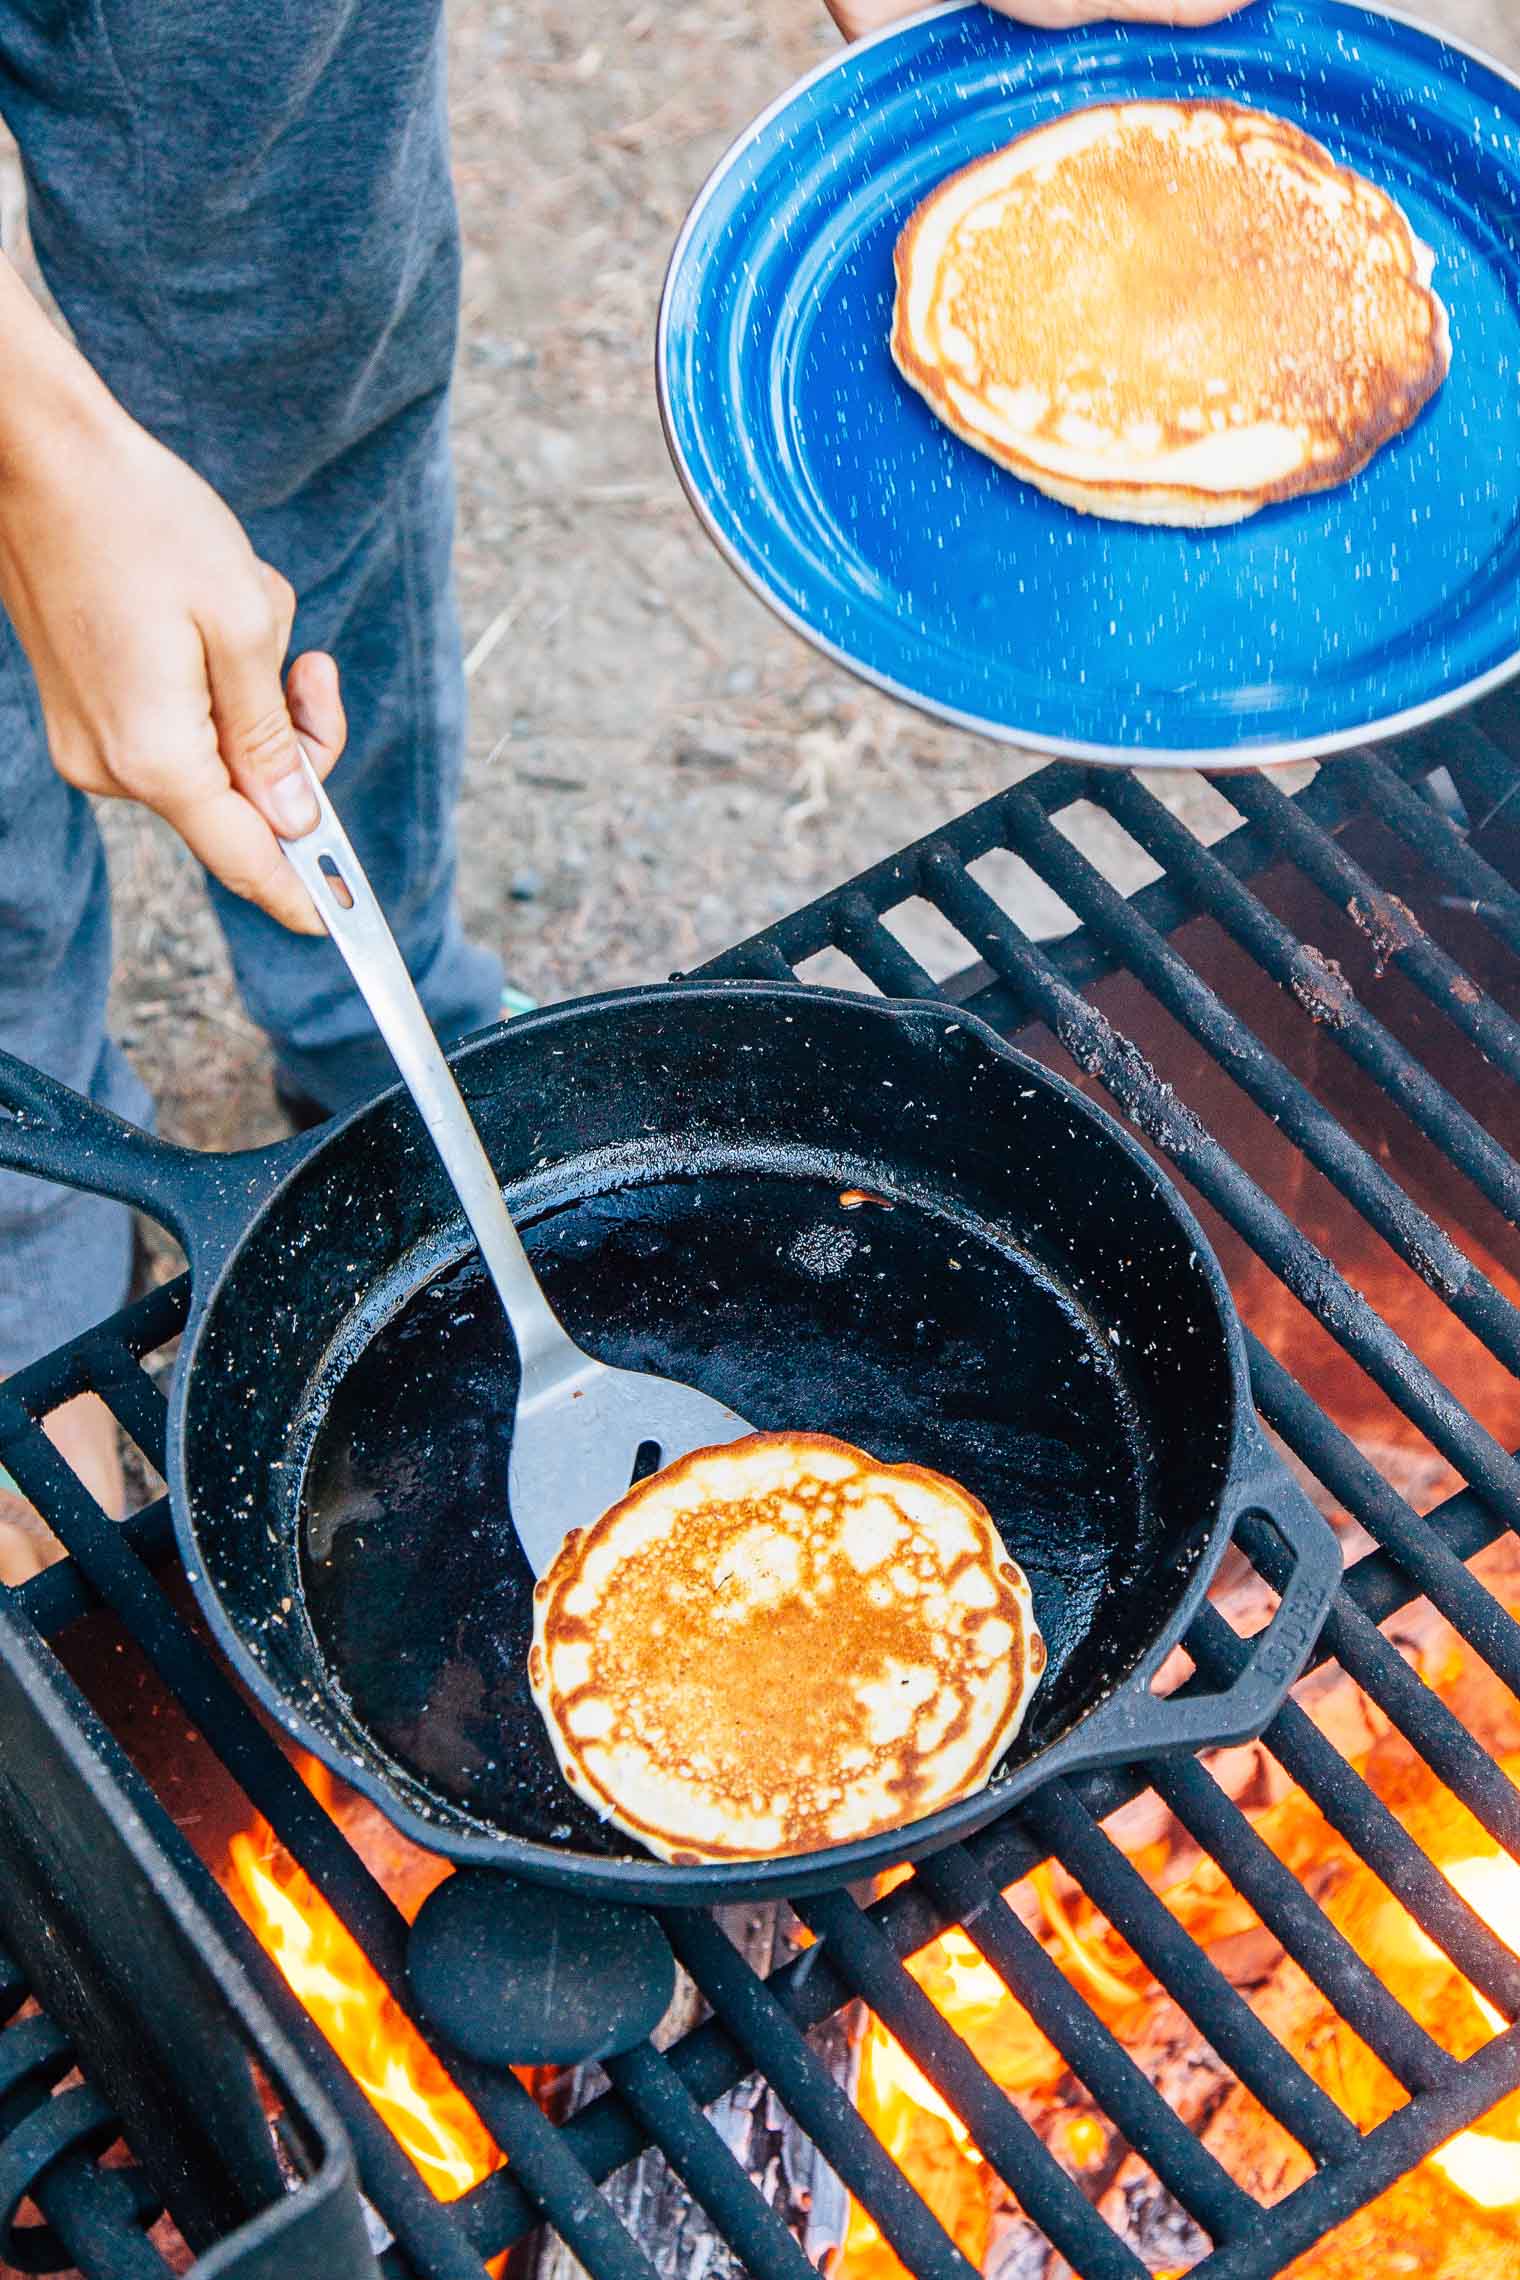 Michael using a spatula to remove a pancake from a cast iron skillet over a campfire